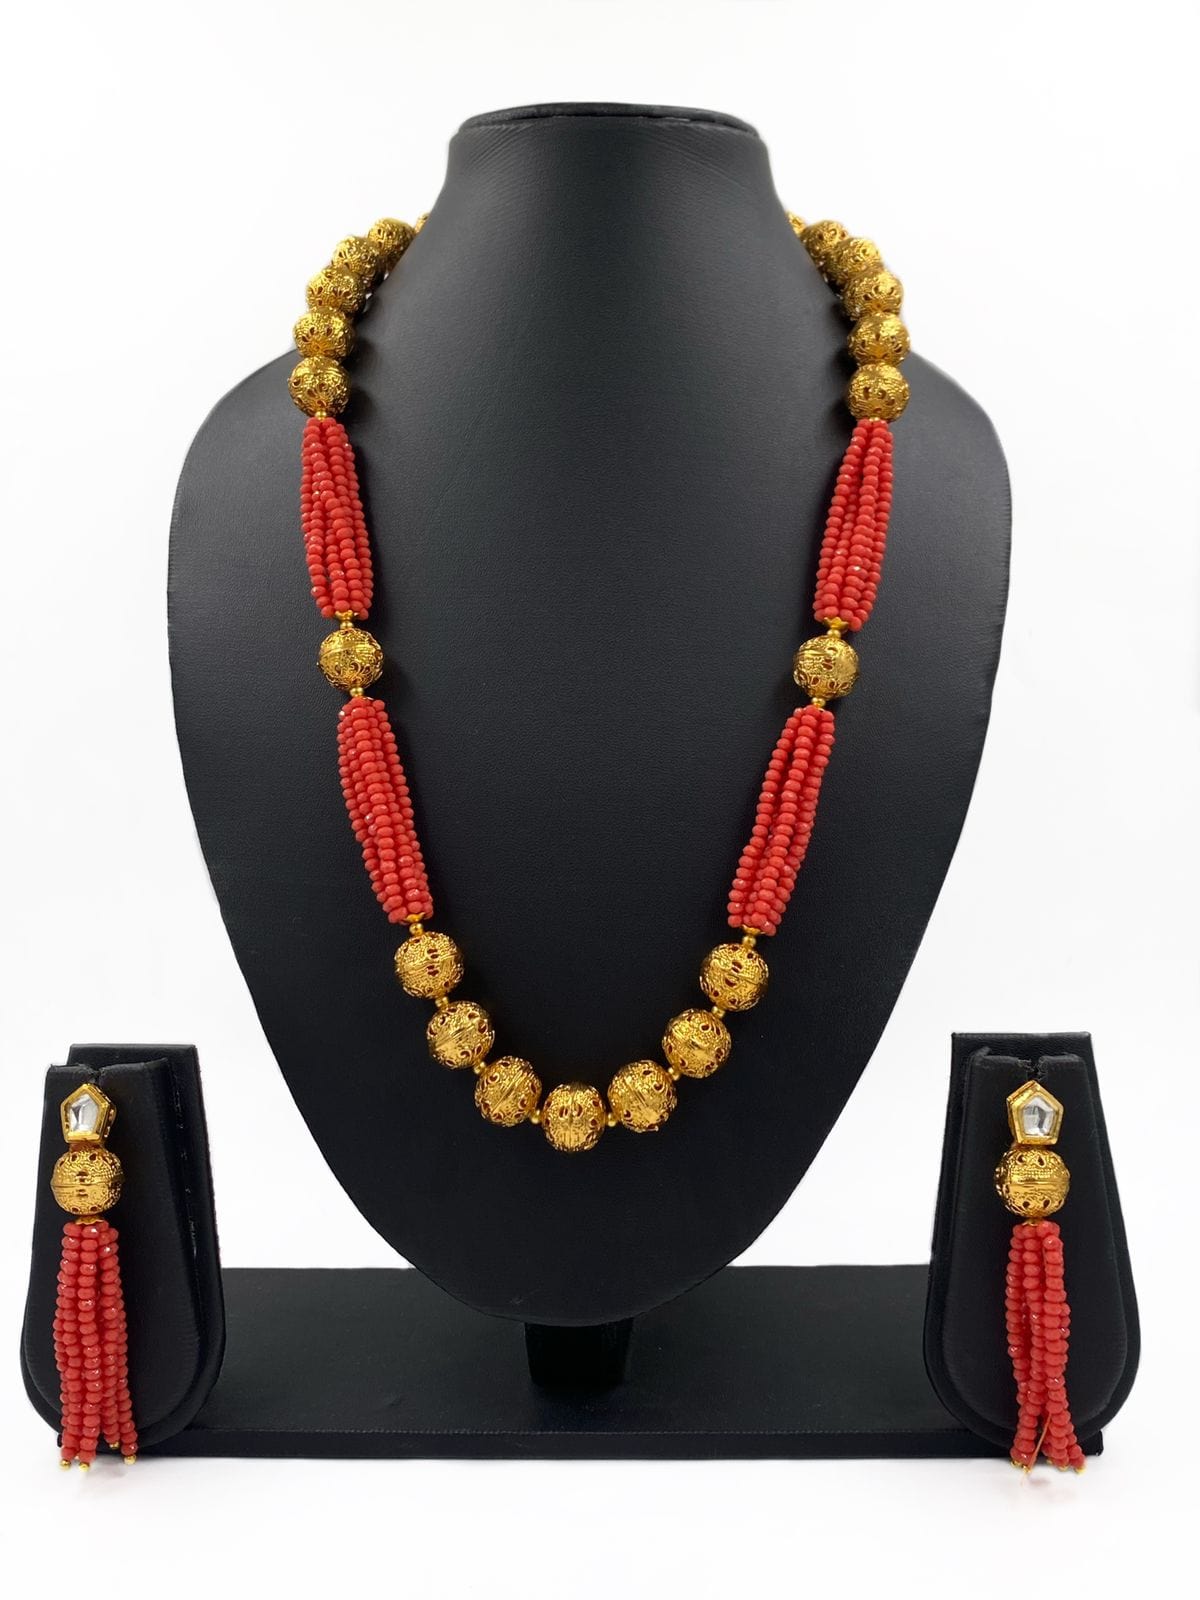 Buy Crystal Beads Chain In Peach Color Online – Gehna Shop